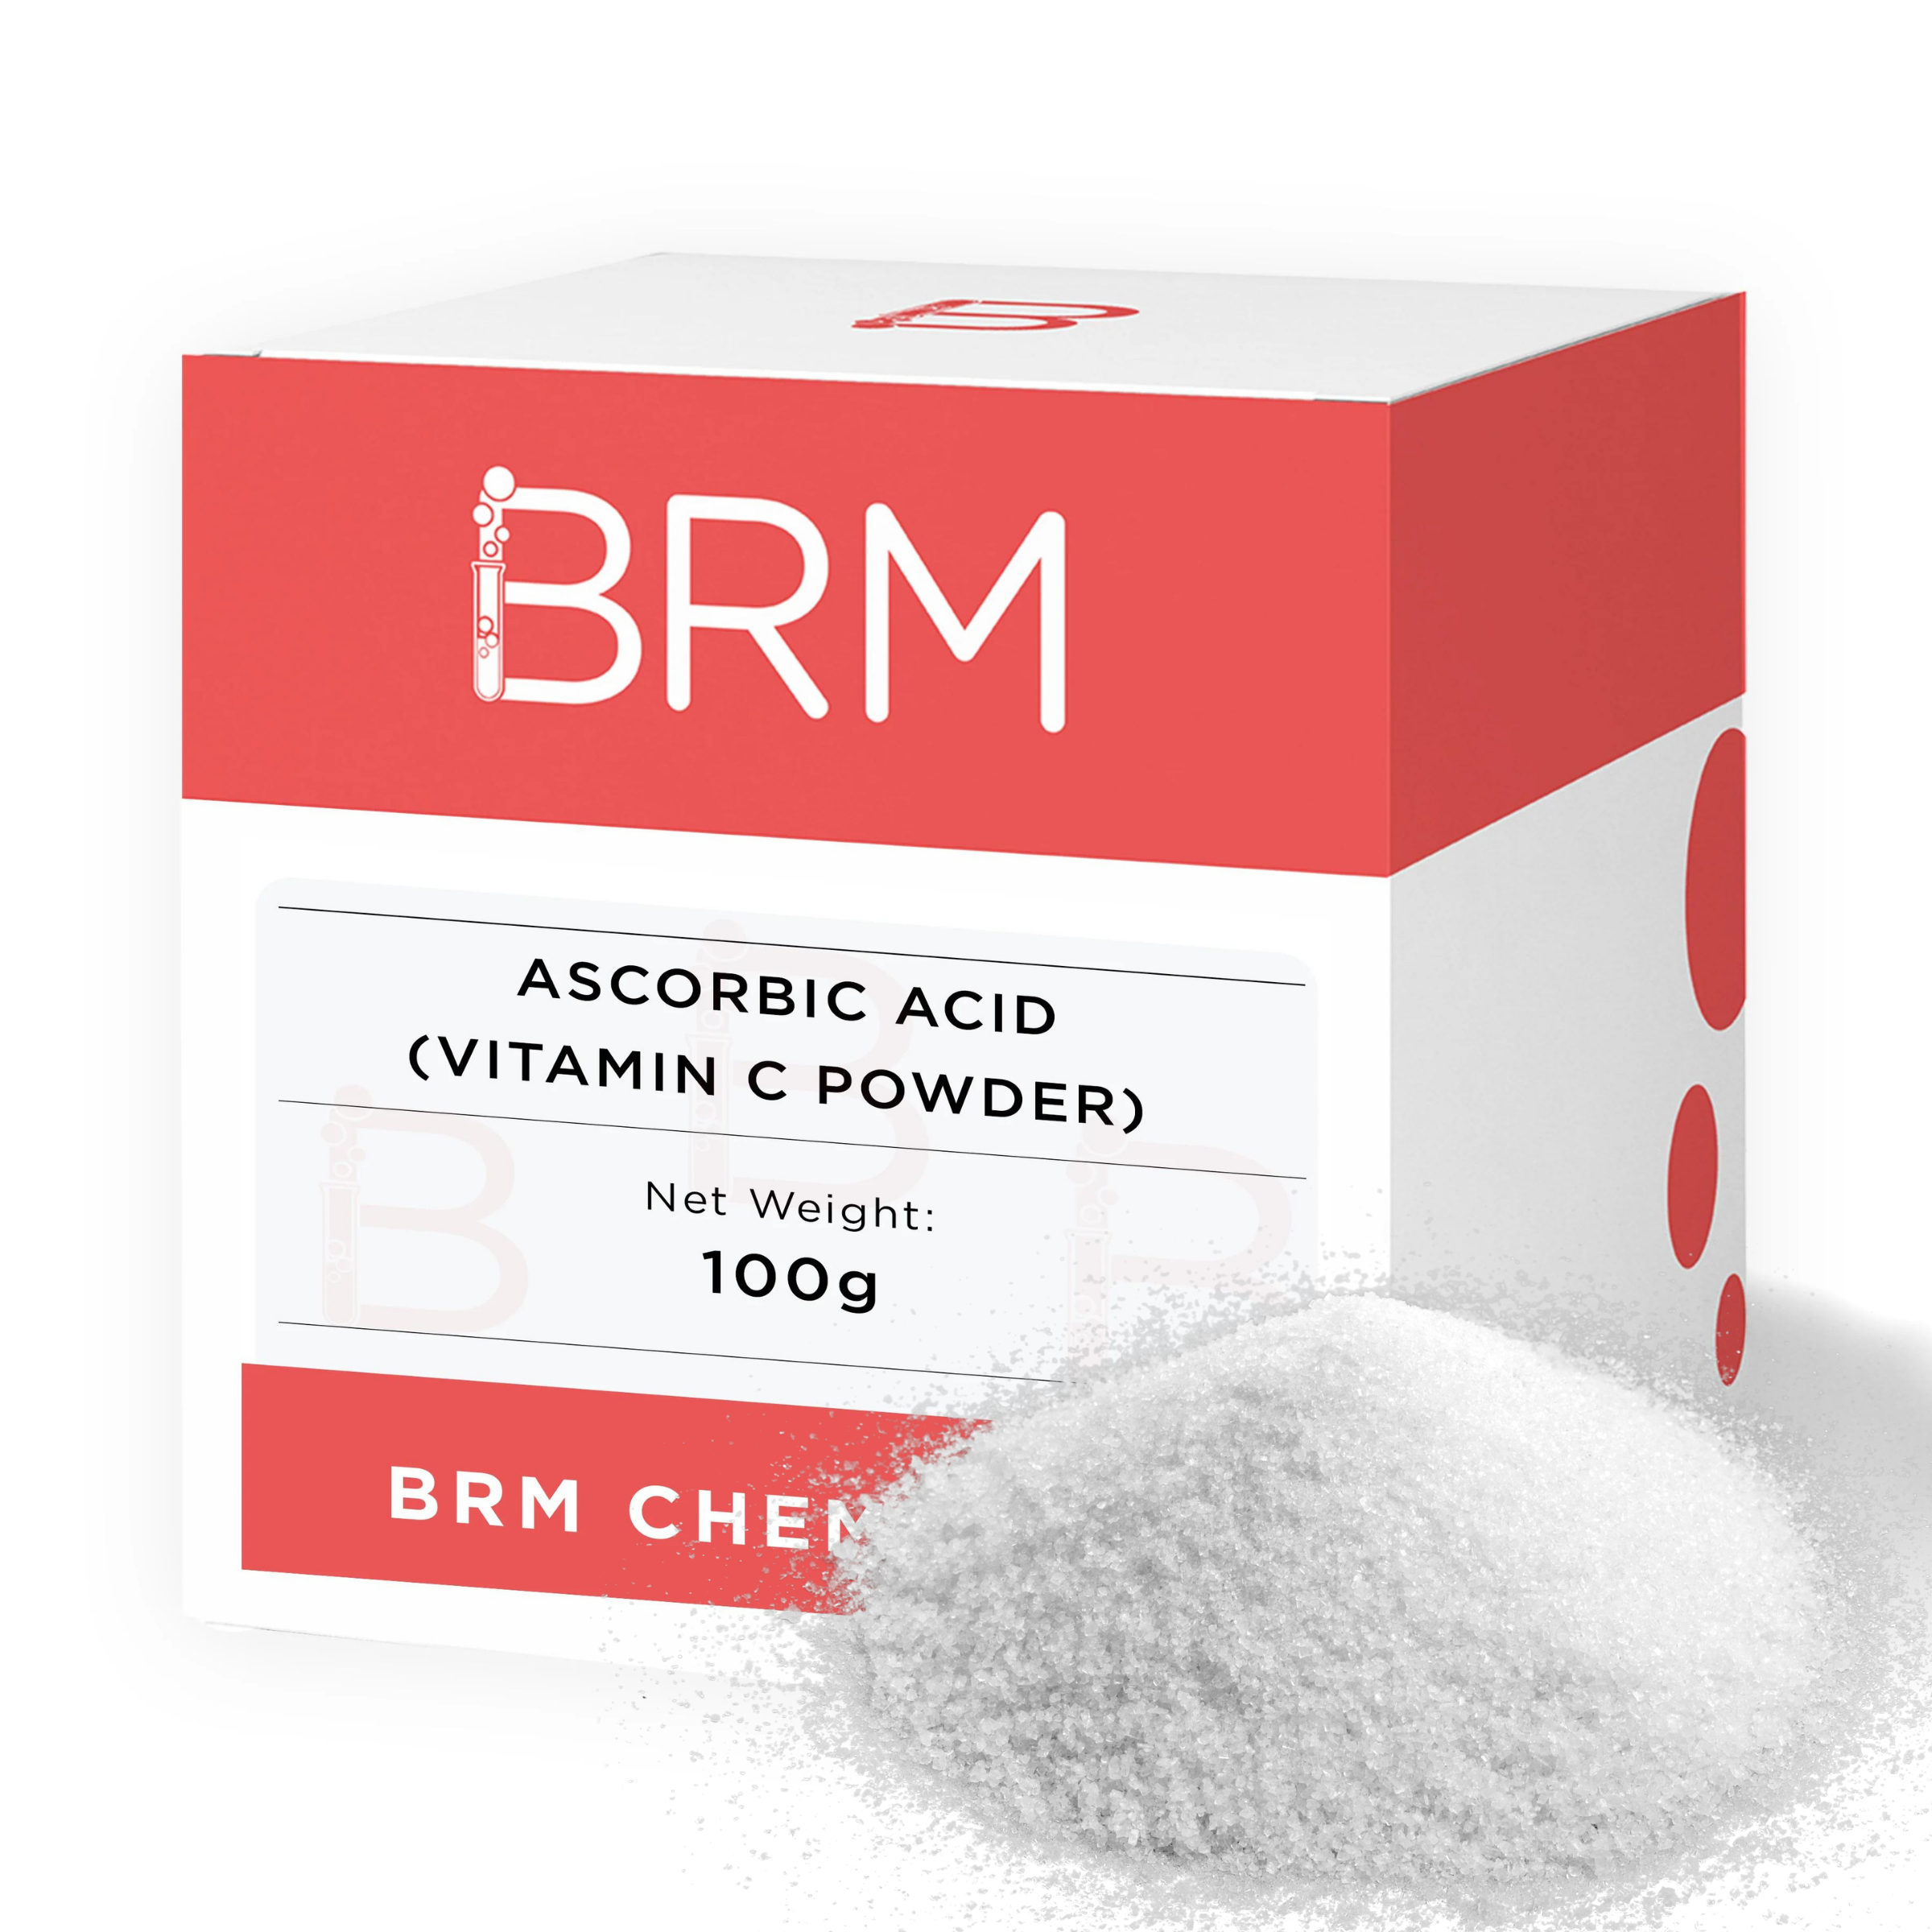 brm-chemicals-ascorbic-acid-vitamin-c-powder-for-serum-making-anti-ageing-beauty-formulations-lotion-making-cosmetic-making-diy-personal-care-for-face-hair-skin-body